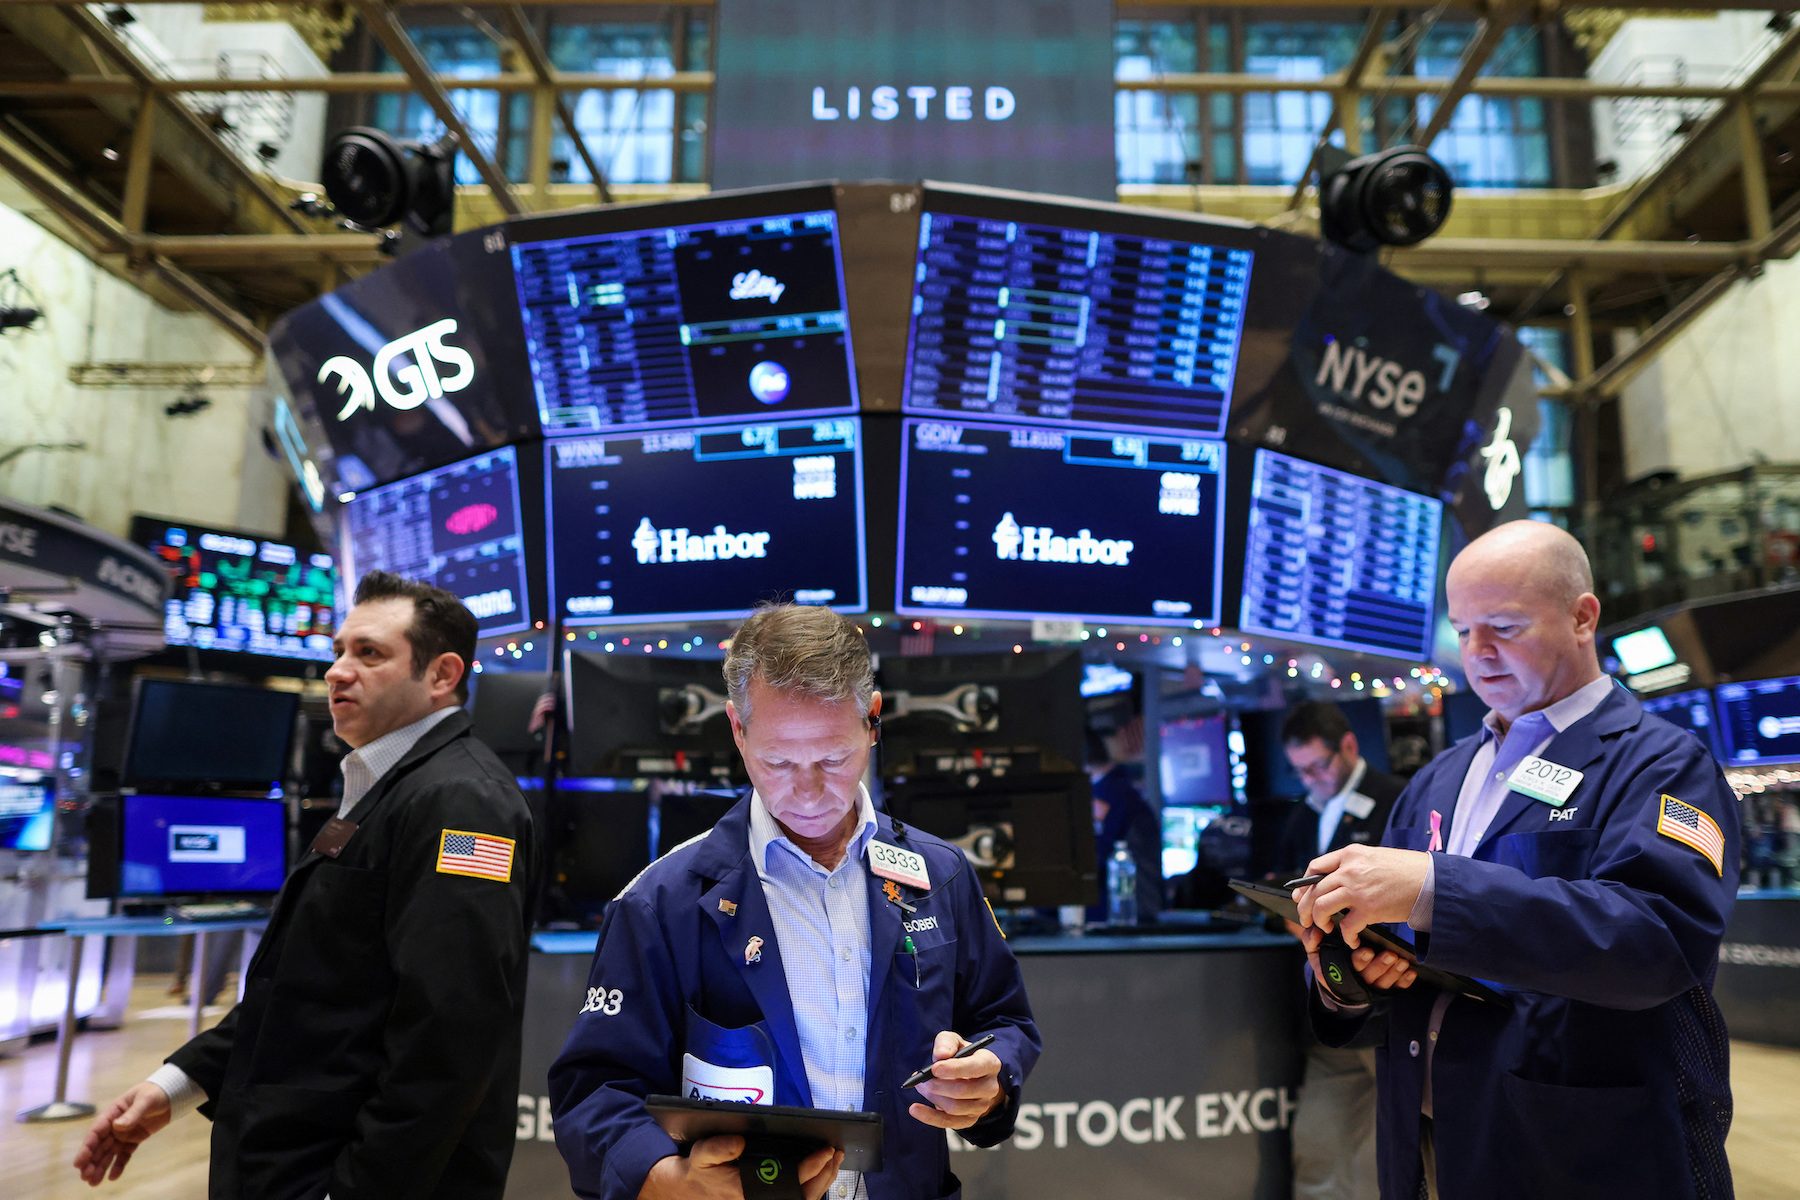 Stocks gain, yields dip after US data; Fed eyed